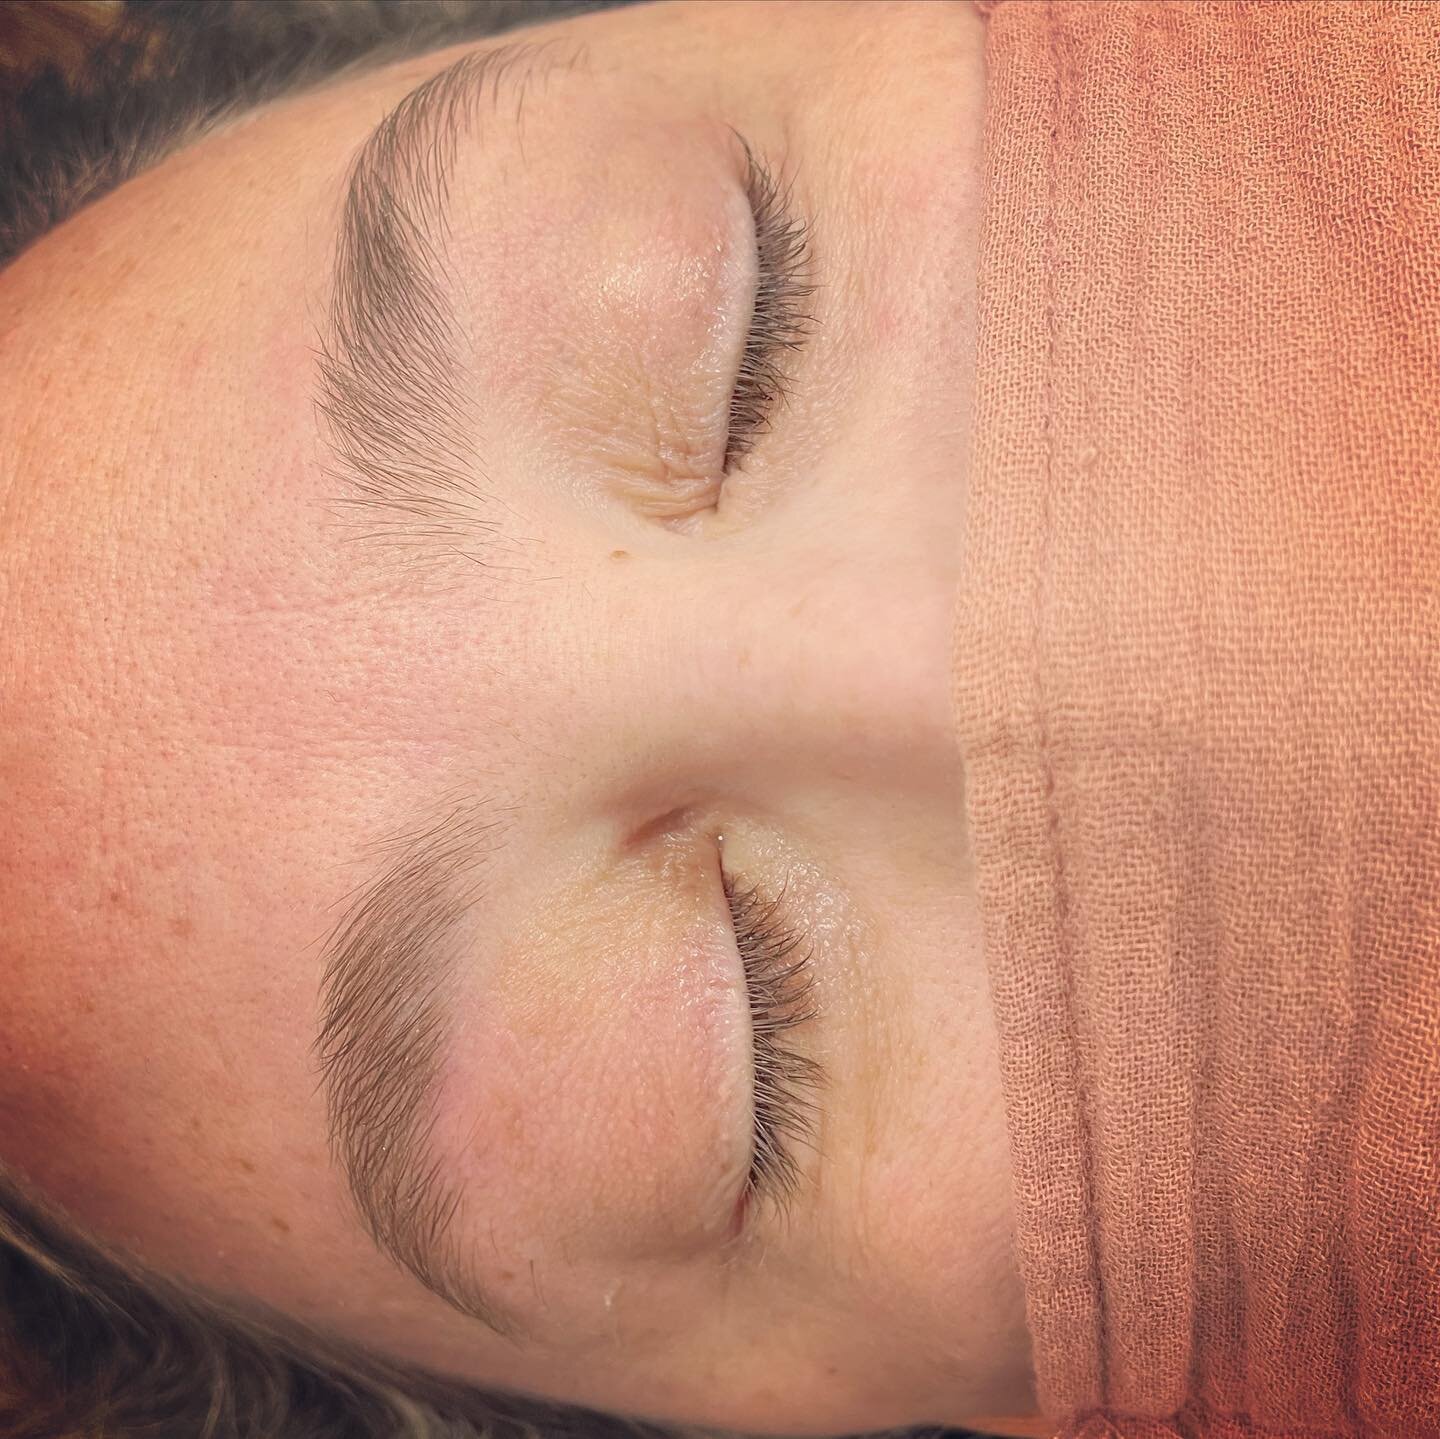 Shape, Lift , Tint, said in a 80s workout video voice! 
Feeling a wave a change coming, want to heighten your own natural look? Need a little shake up? 
Brows are everything. Look at these natural looking results with just a little bit of effort. 
Li